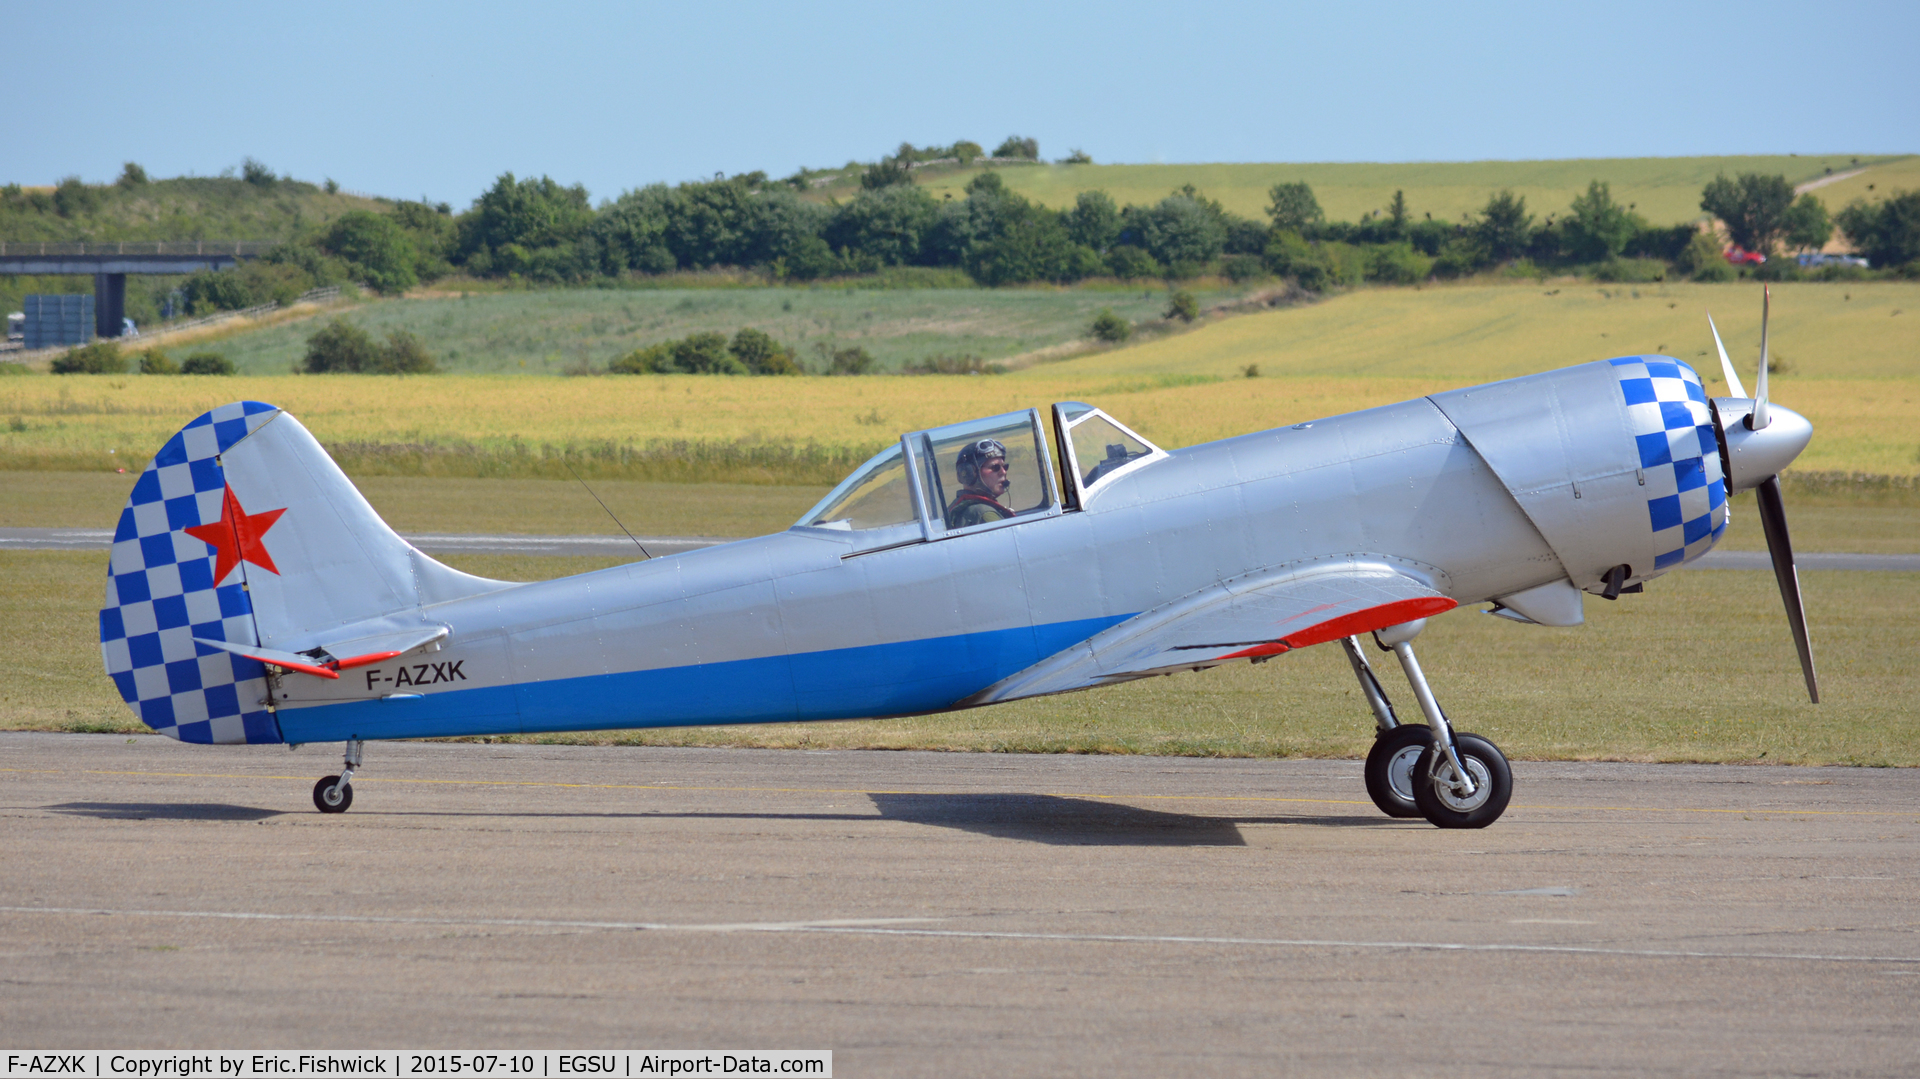 F-AZXK, 1986 Yakovlev Yak-50 C/N 863211, 2. F-AZXK arriving for The Flying Legends Air Show, July 2015.